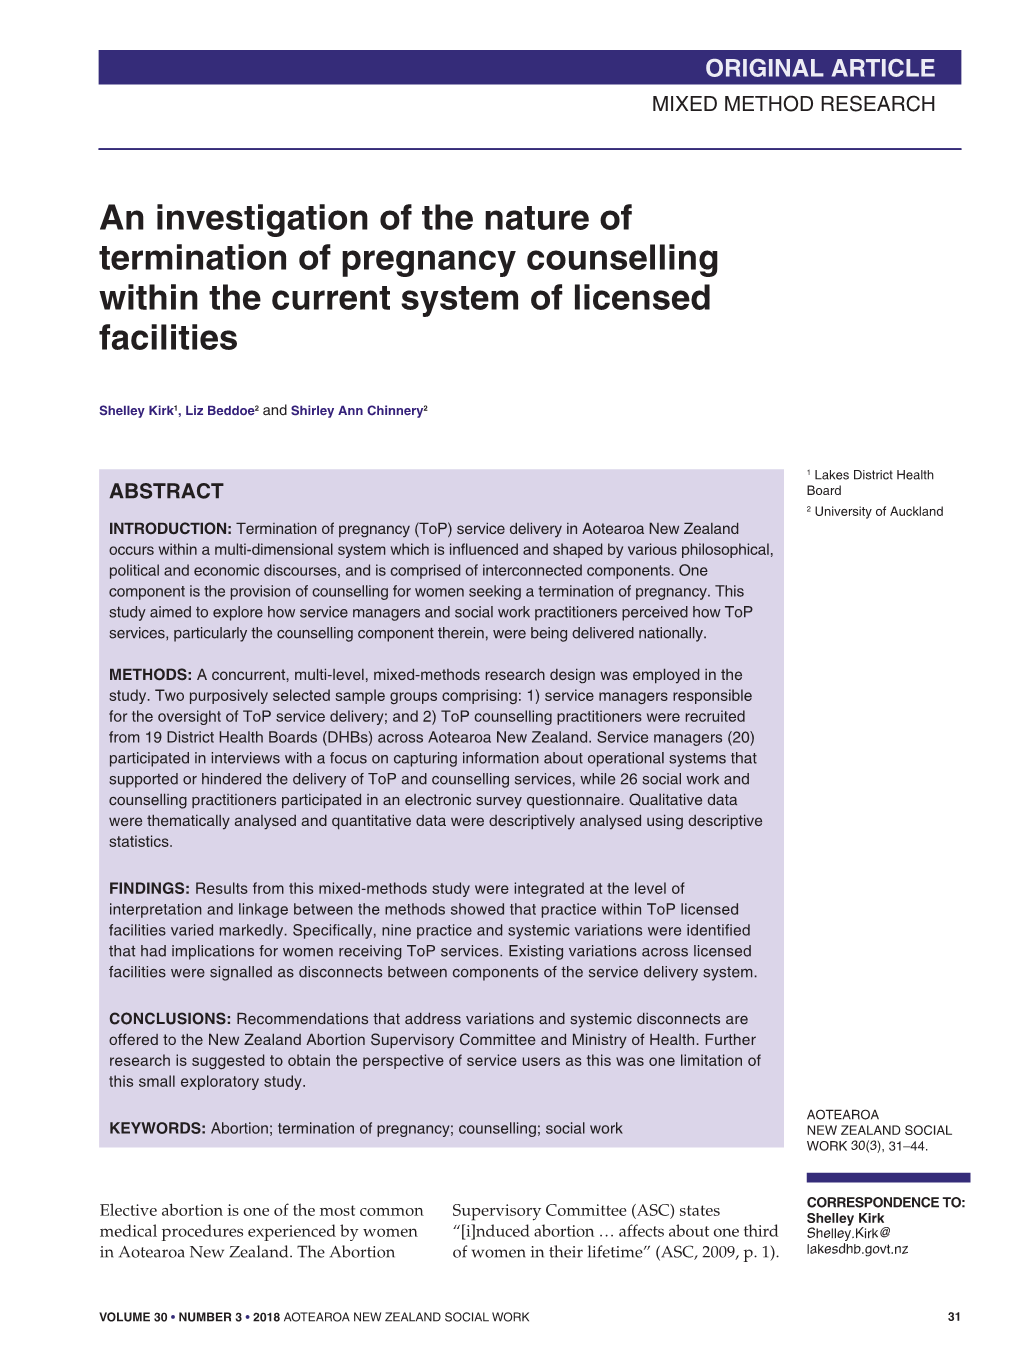 An Investigation of the Nature of Termination of Pregnancy Counselling Within the Current System of Licensed Facilities